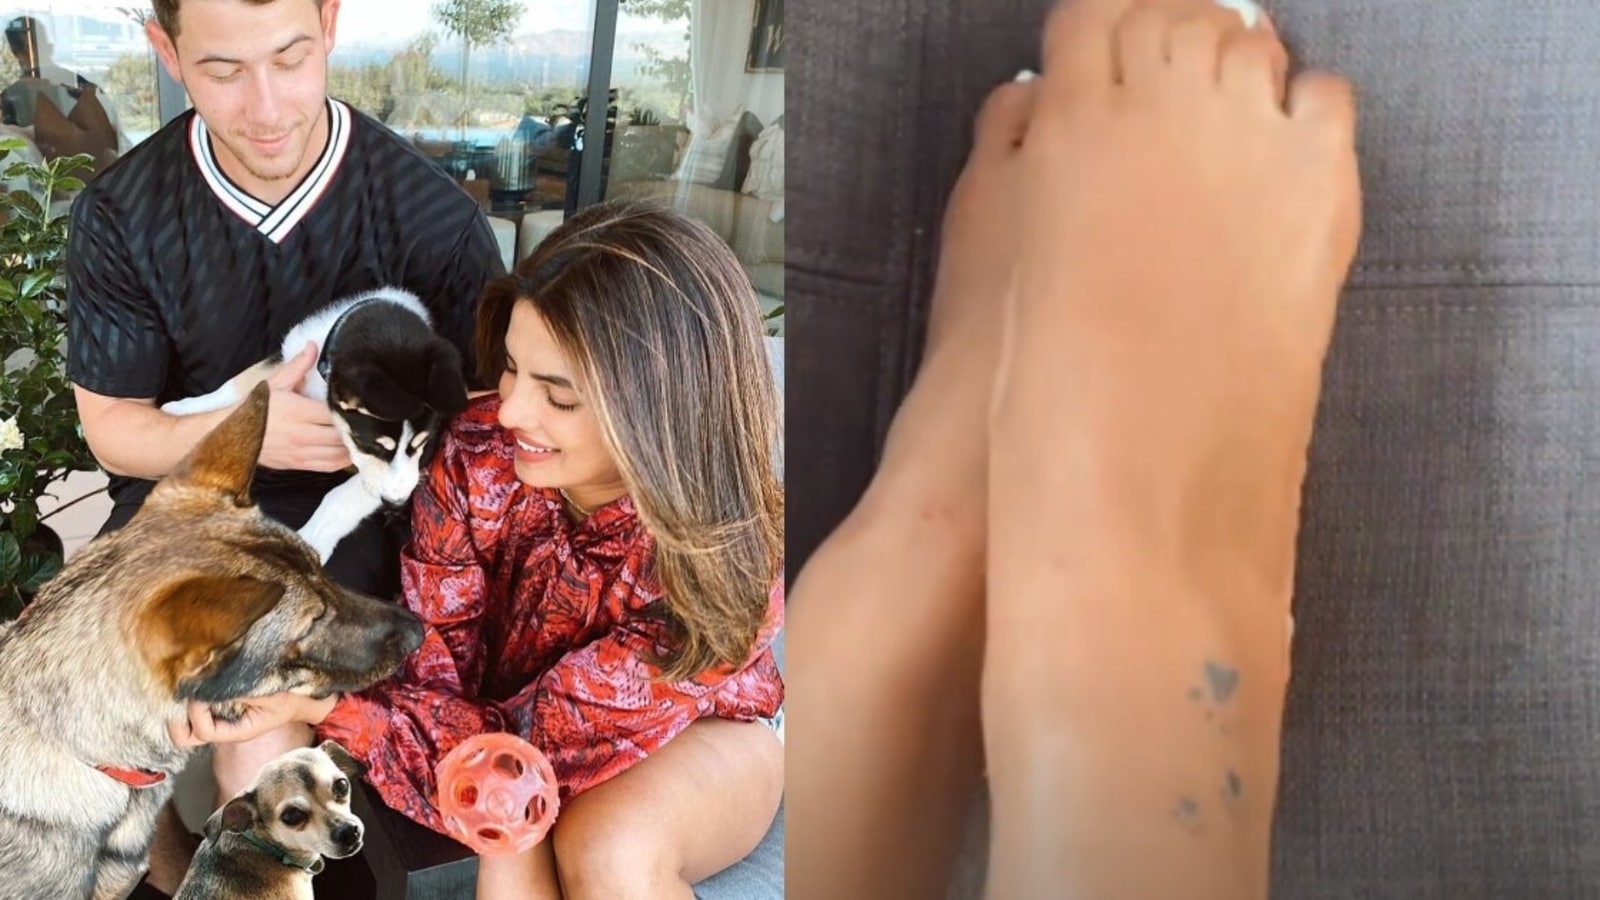 Priyanka Chopra reveals her 'summer tattoo', dedicates new ink to her pet dogs. See pic ...